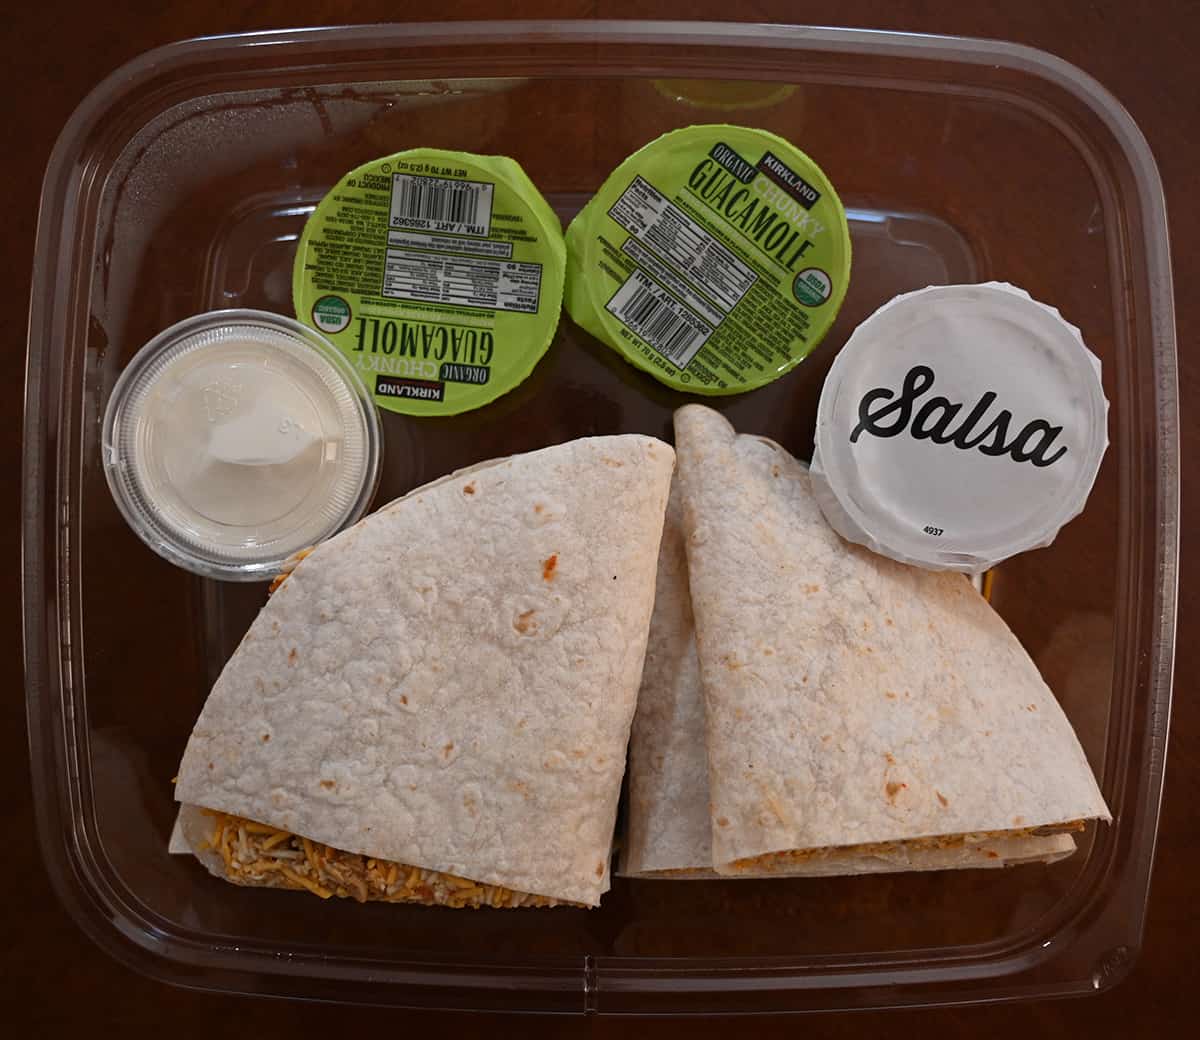 Top down image of the quesadillas containers opened so the quesadillas and sauces are visble. 